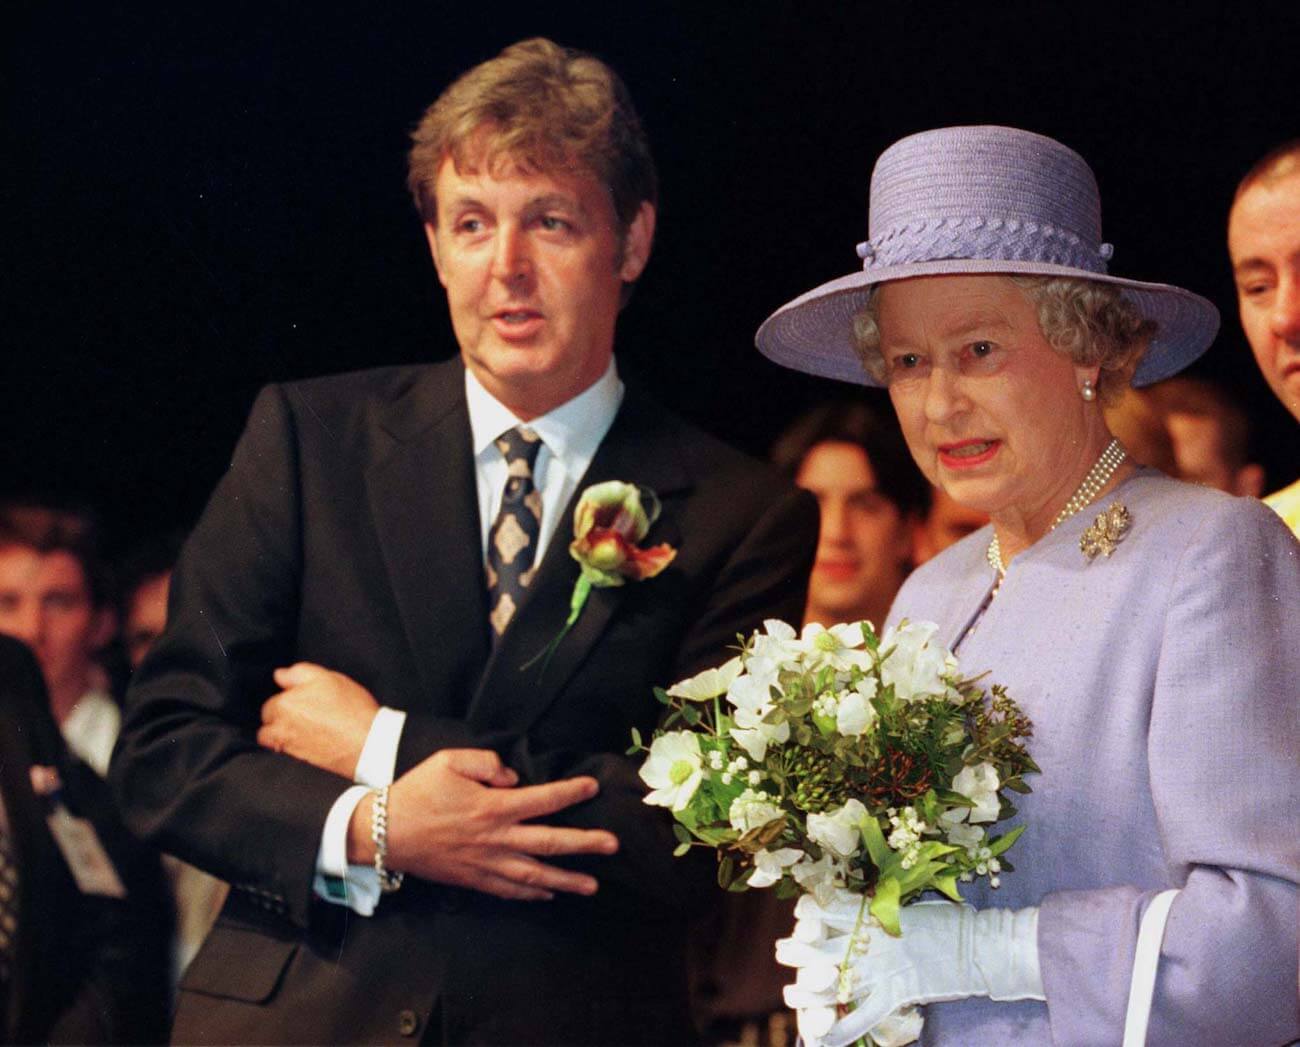 Paul McCartney and Queen Elizabeth II at the opening of the Liverpool Institute for Performing Arts.